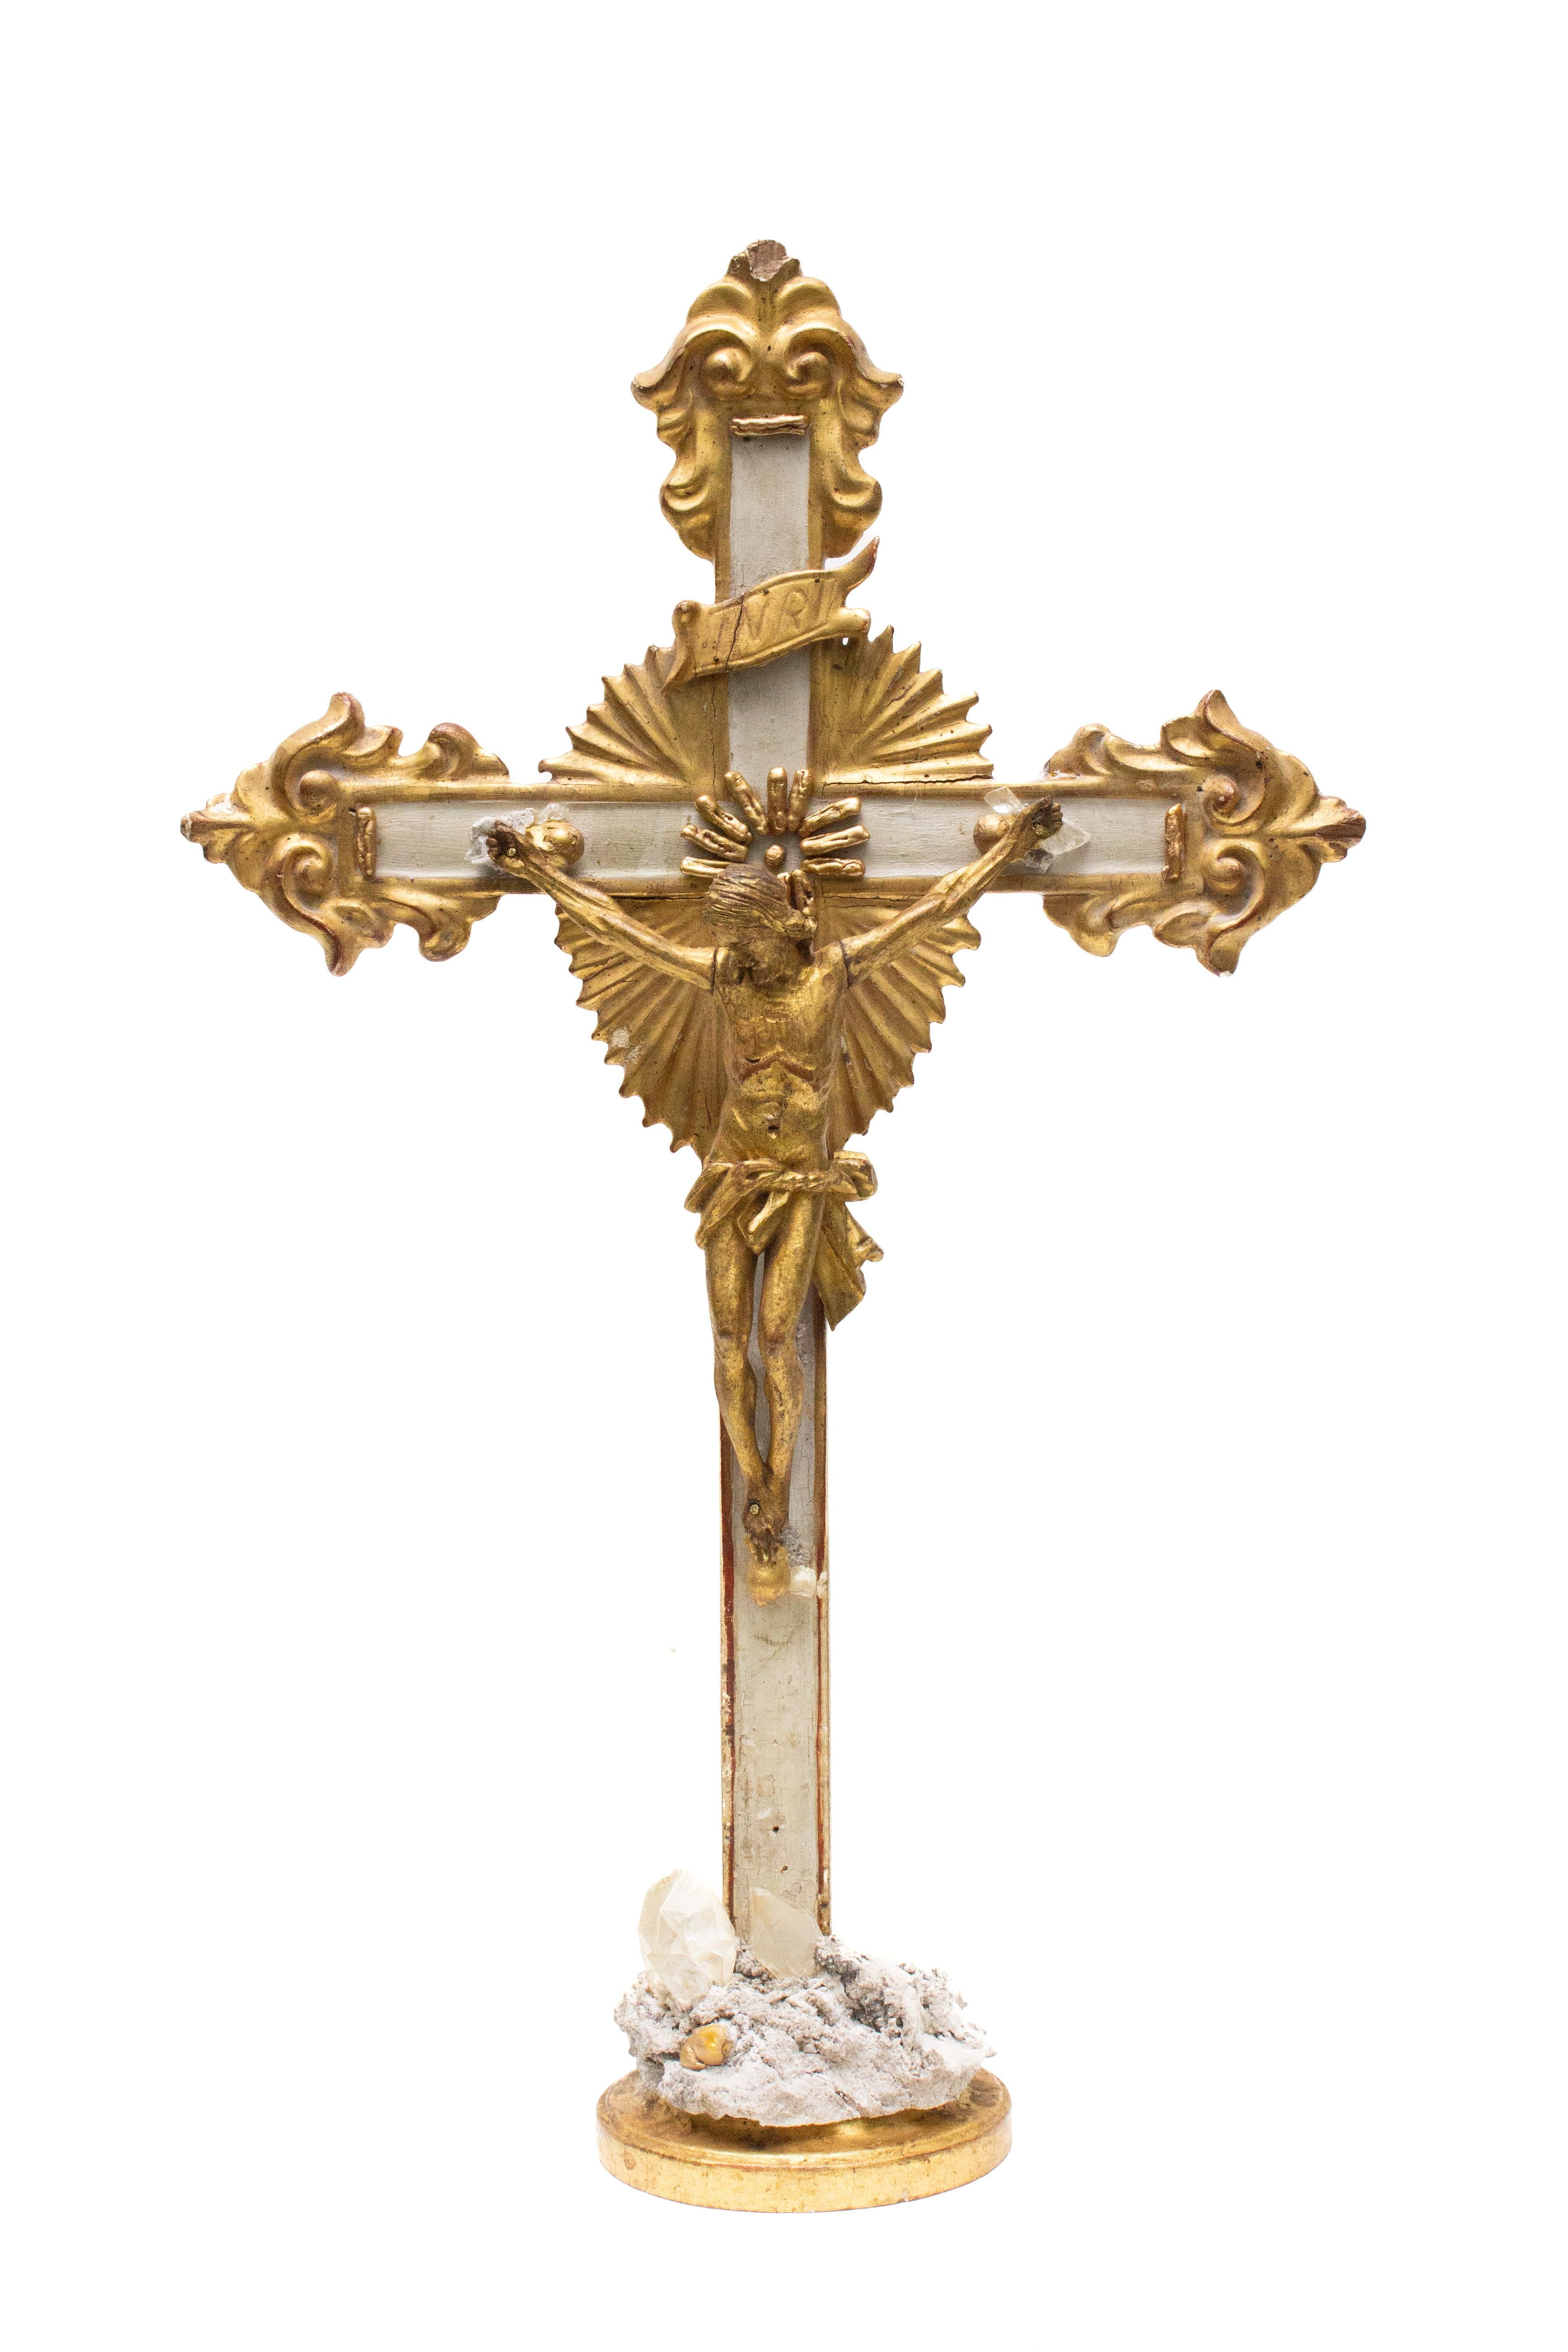 Sculptural 18th century Italian gilded crucifix with calcite crystals and baroque pearls. 

The calcite crystals are from Elmwood Mine, Tennessee. It is an example of the world's finest crystallized calcite. It is unequaled by those from any other